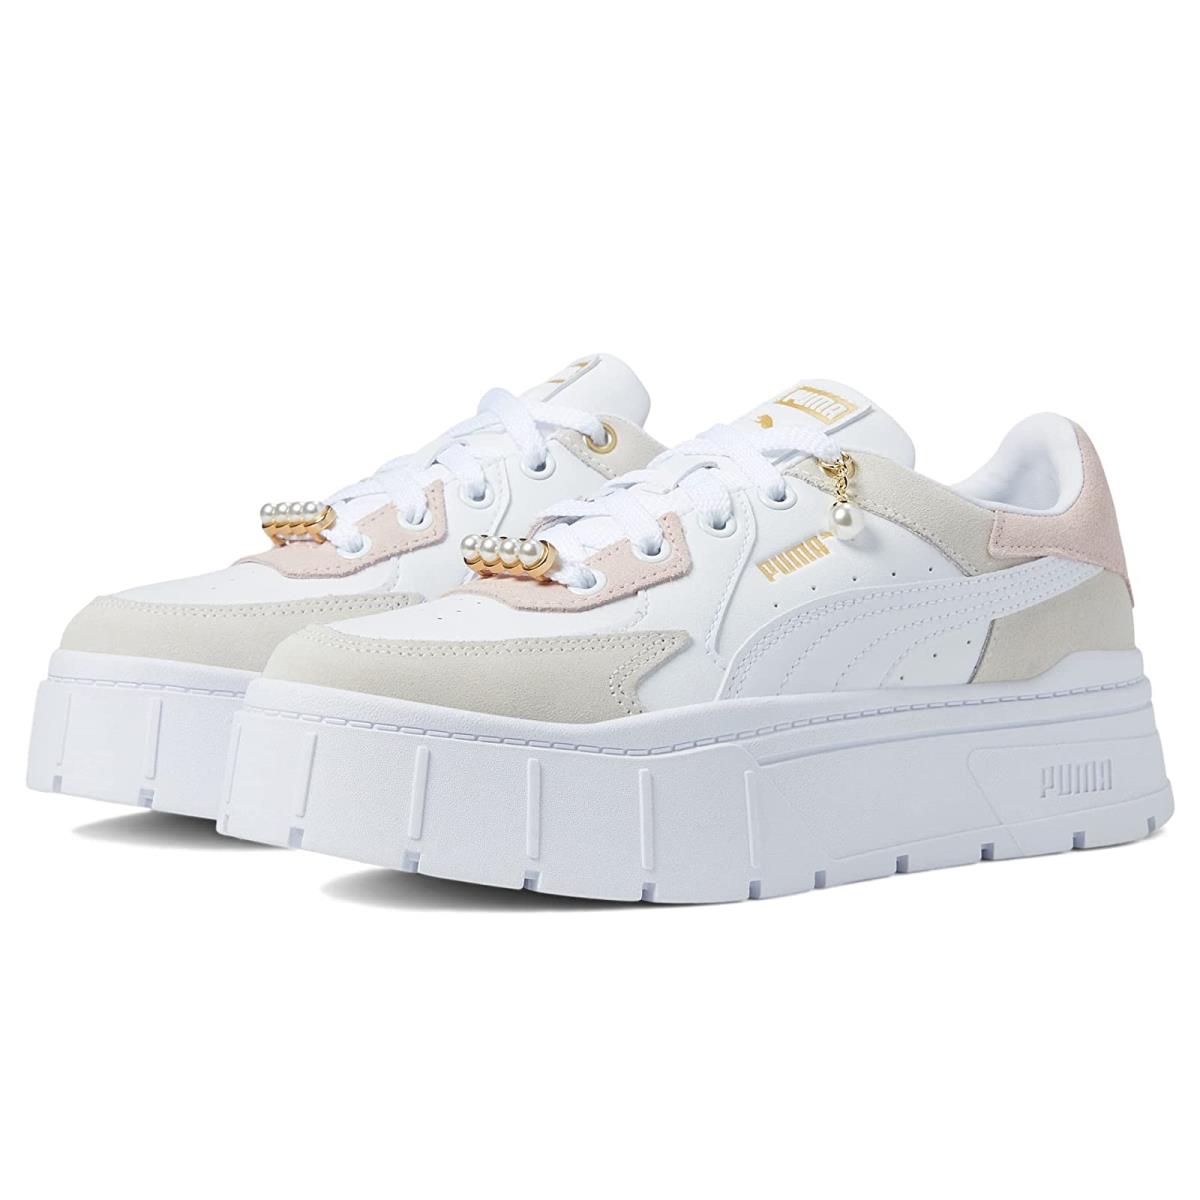 Woman`s Sneakers Athletic Shoes Puma Mayze Stack Edgy Pearl Puma White/Marshmallow/Puma Team Gold